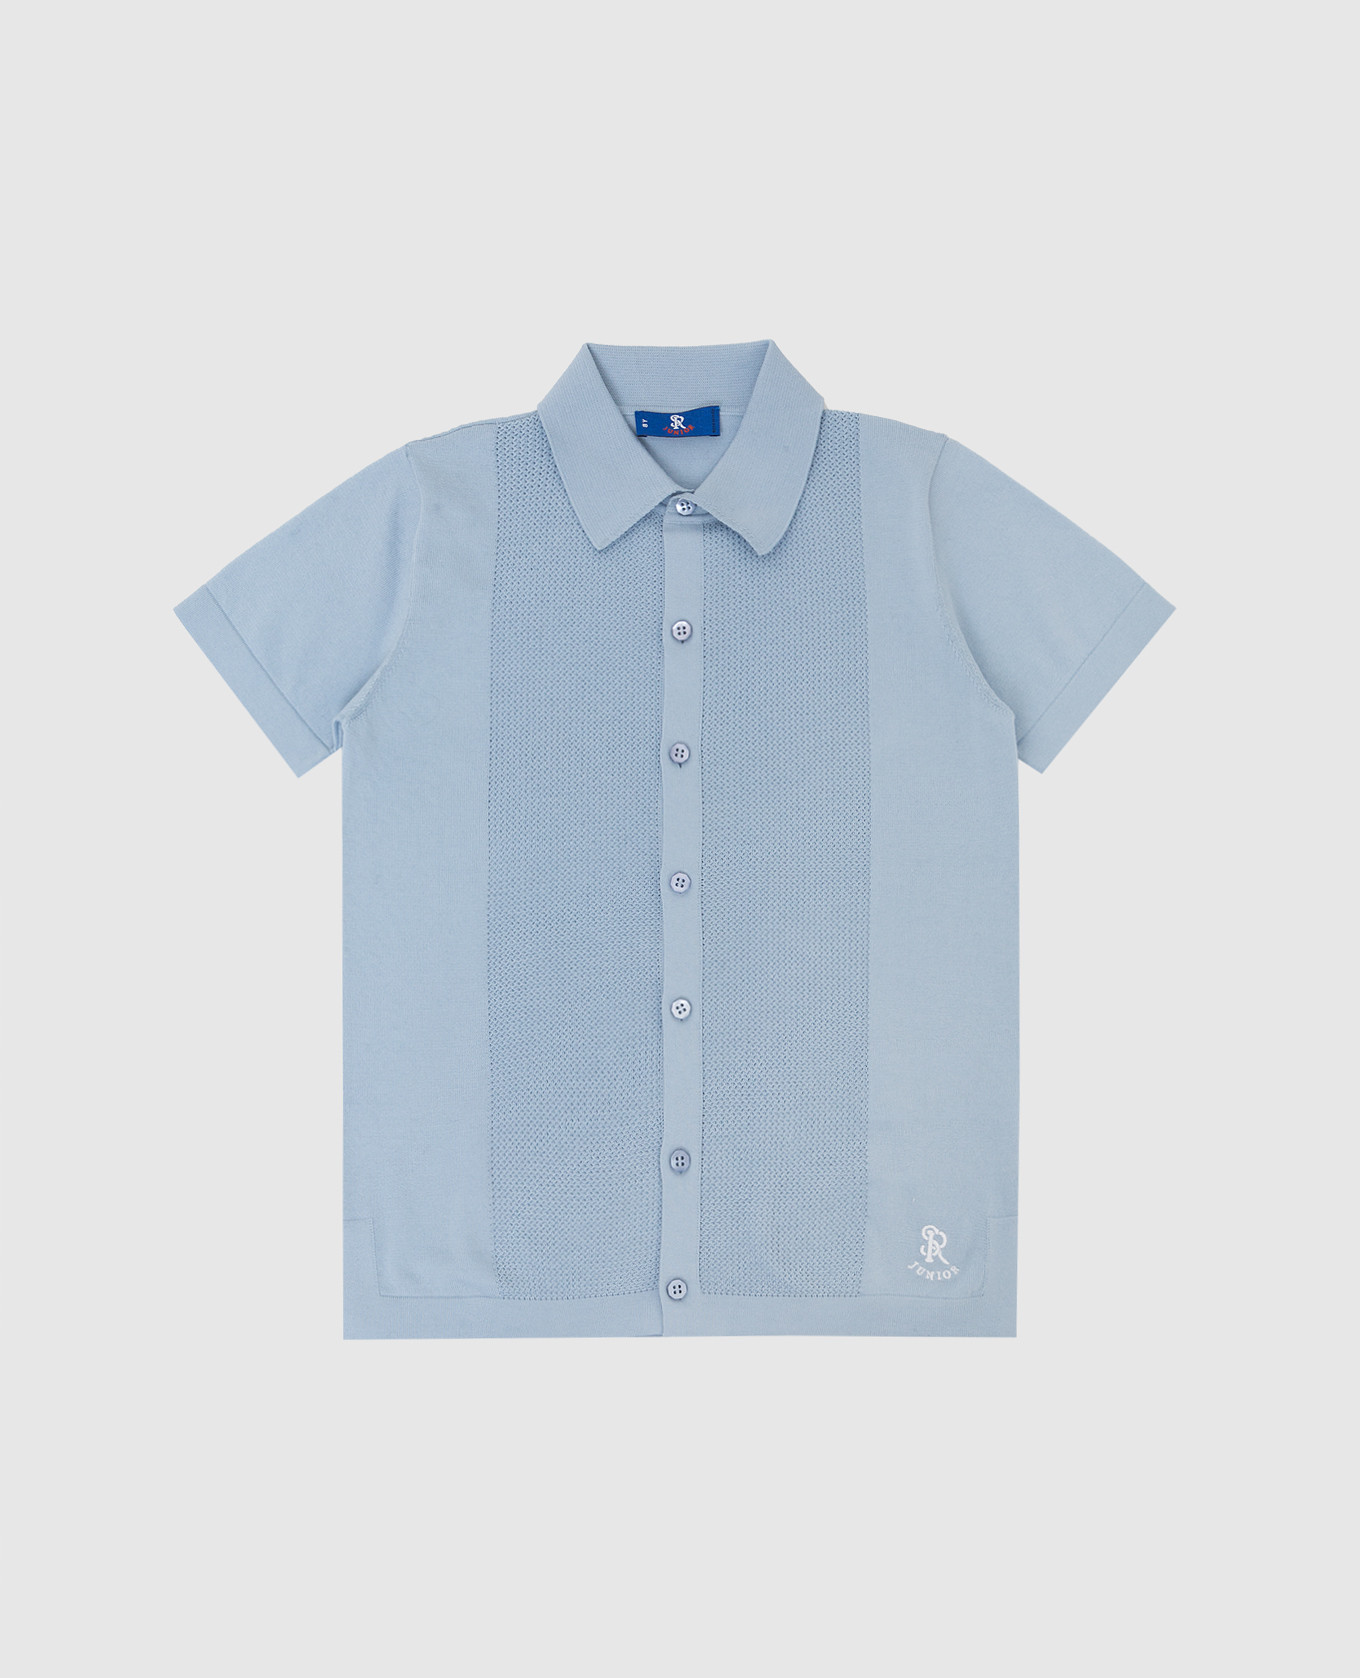 Children's blue shirt with a pattern